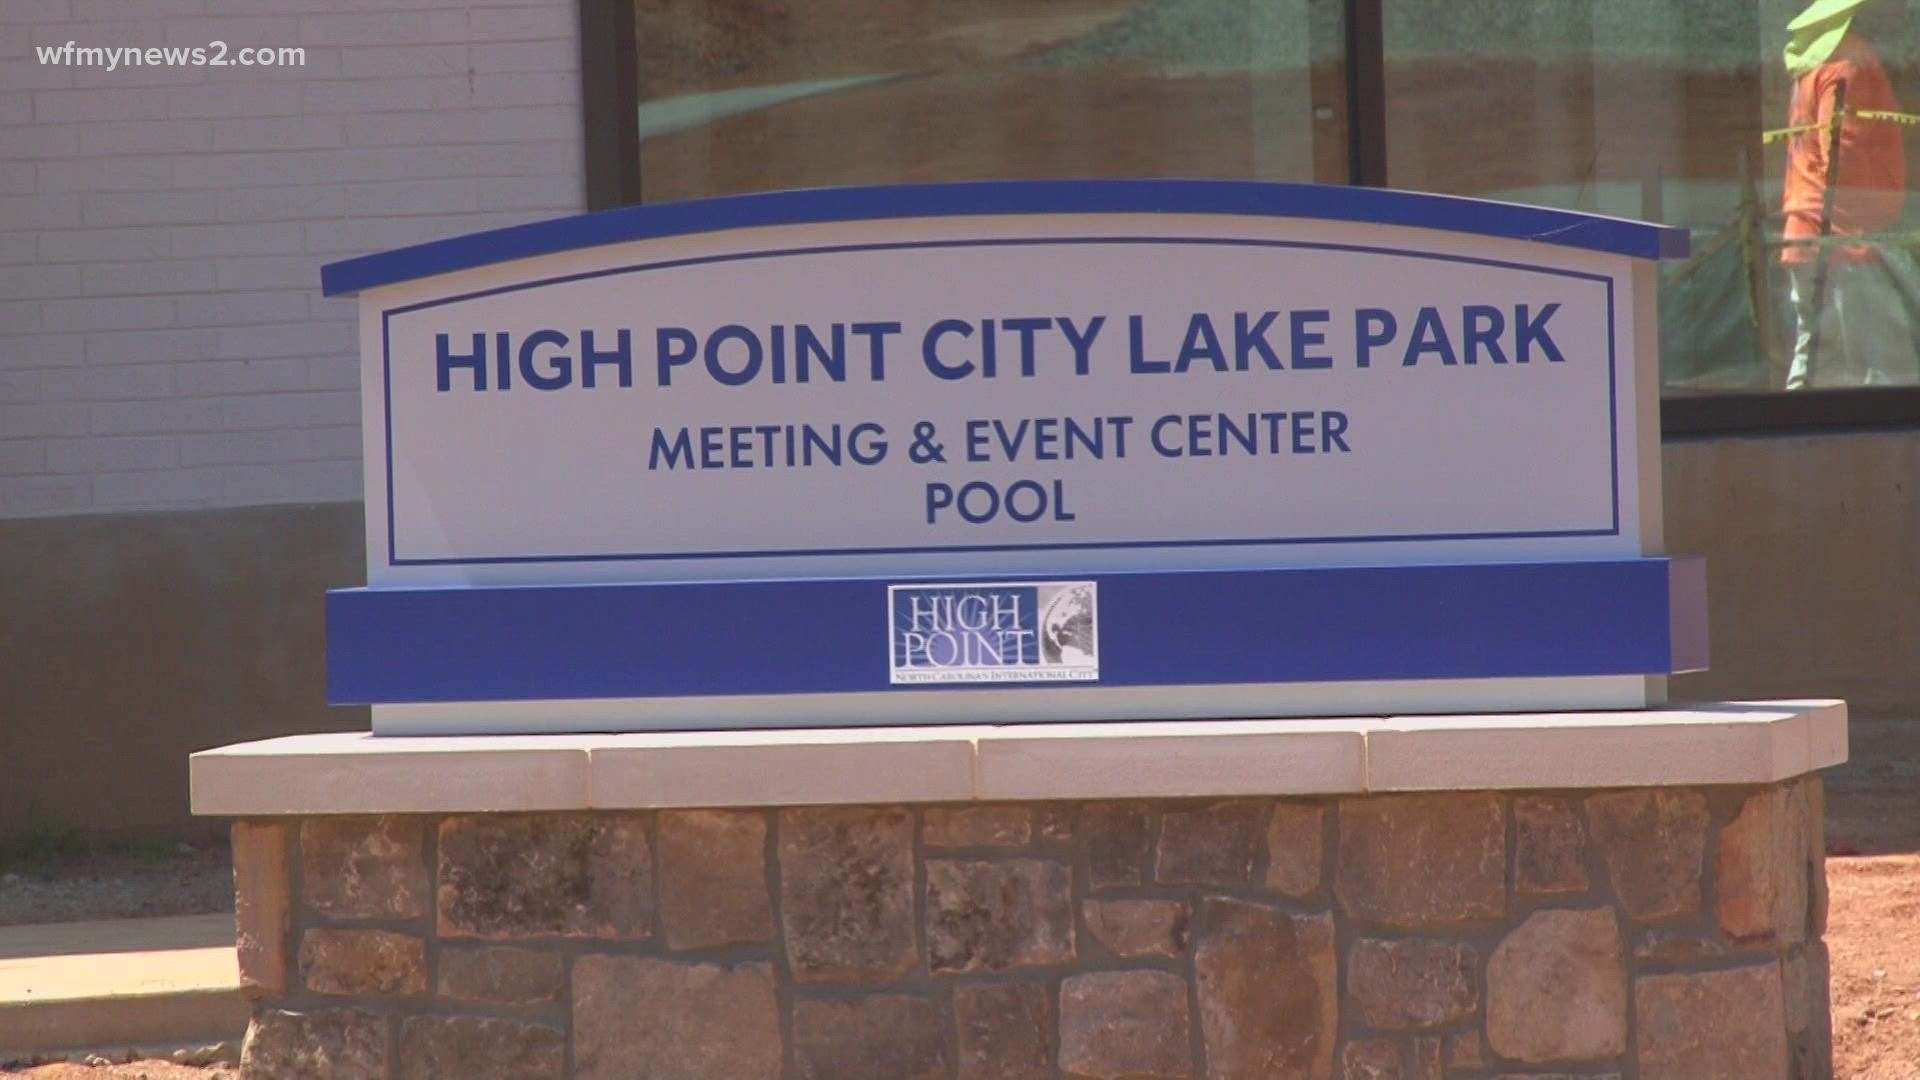 The city of High Point planned to open the pool this year, but they had to push it to 2023.